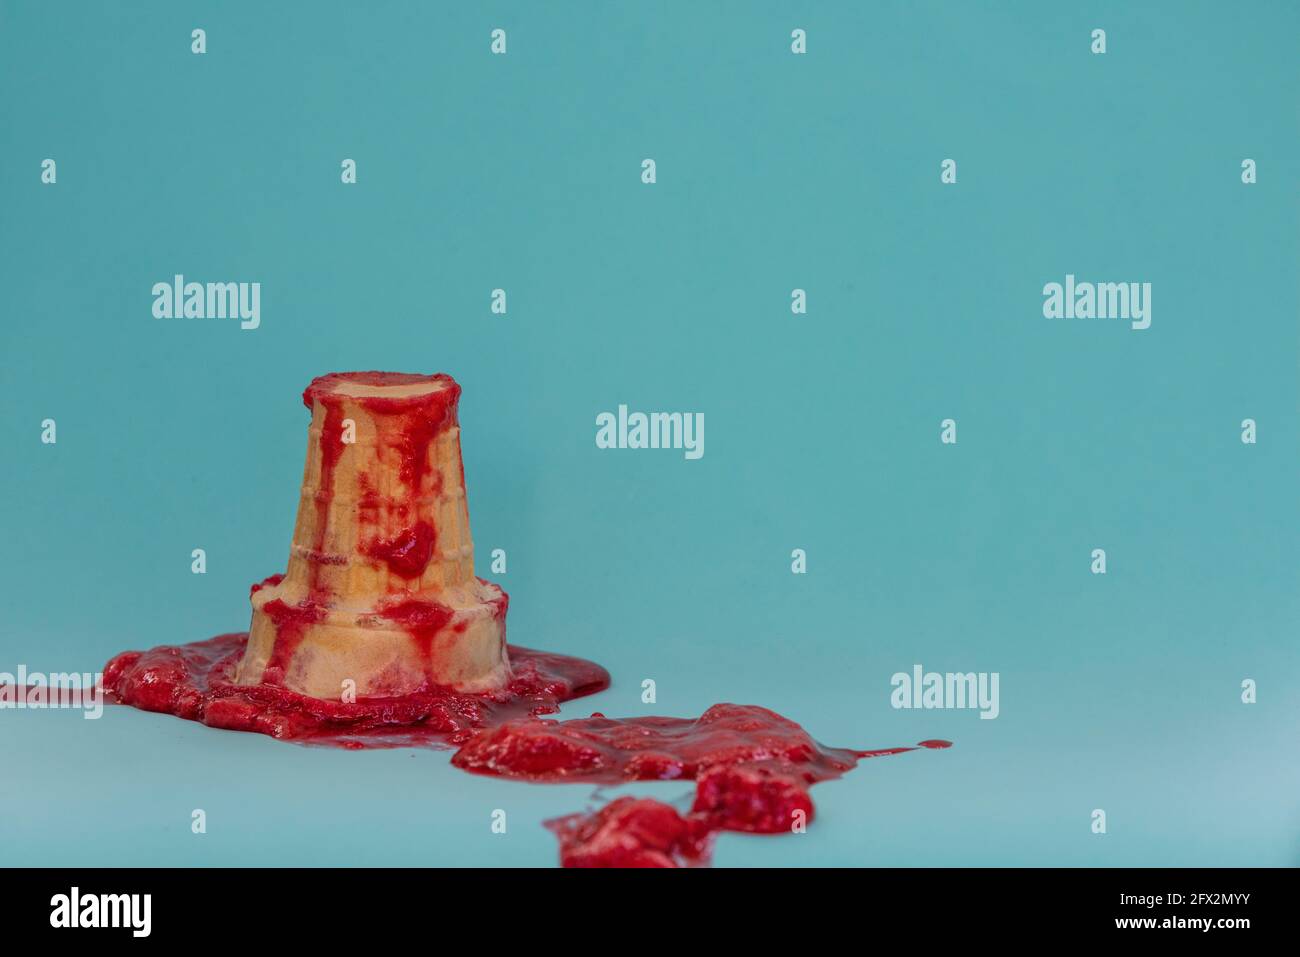 A melted ice cream cone is spilled and splattered on a blue background. Failure concept. Stock Photo